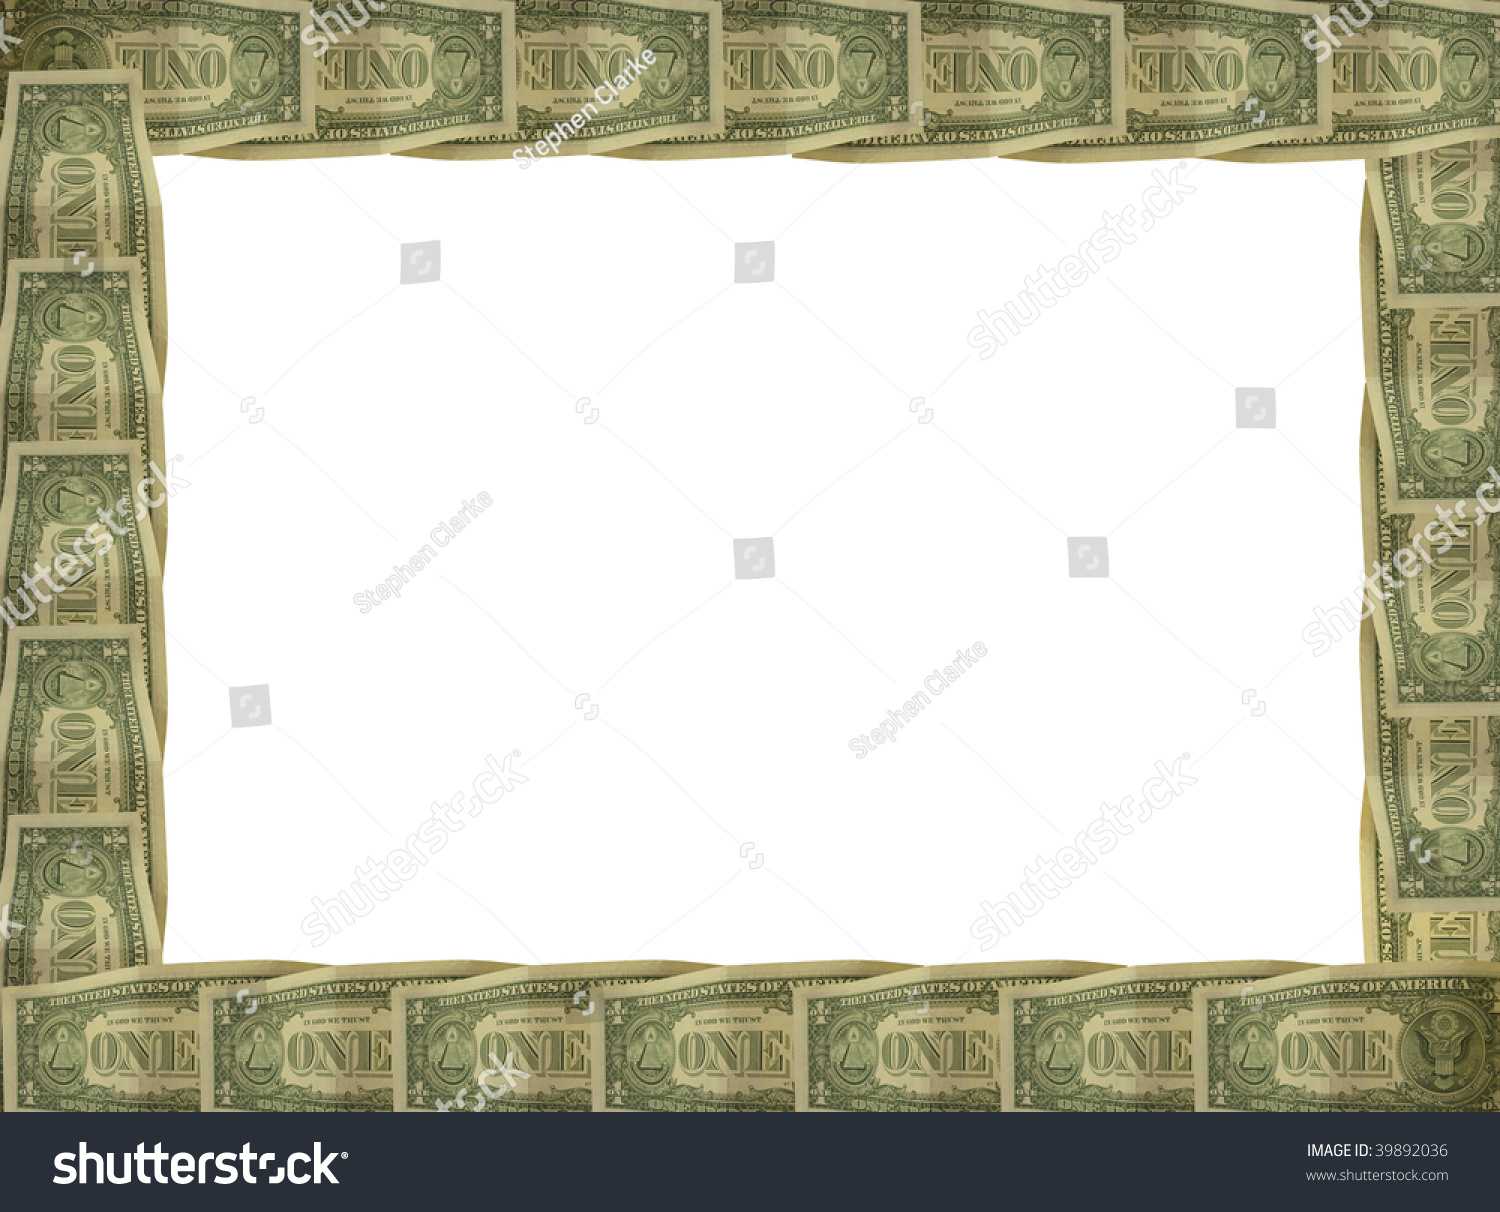 A Dollar Bill Repeated Round The Edge Of A Picture Frame Border Stock ...